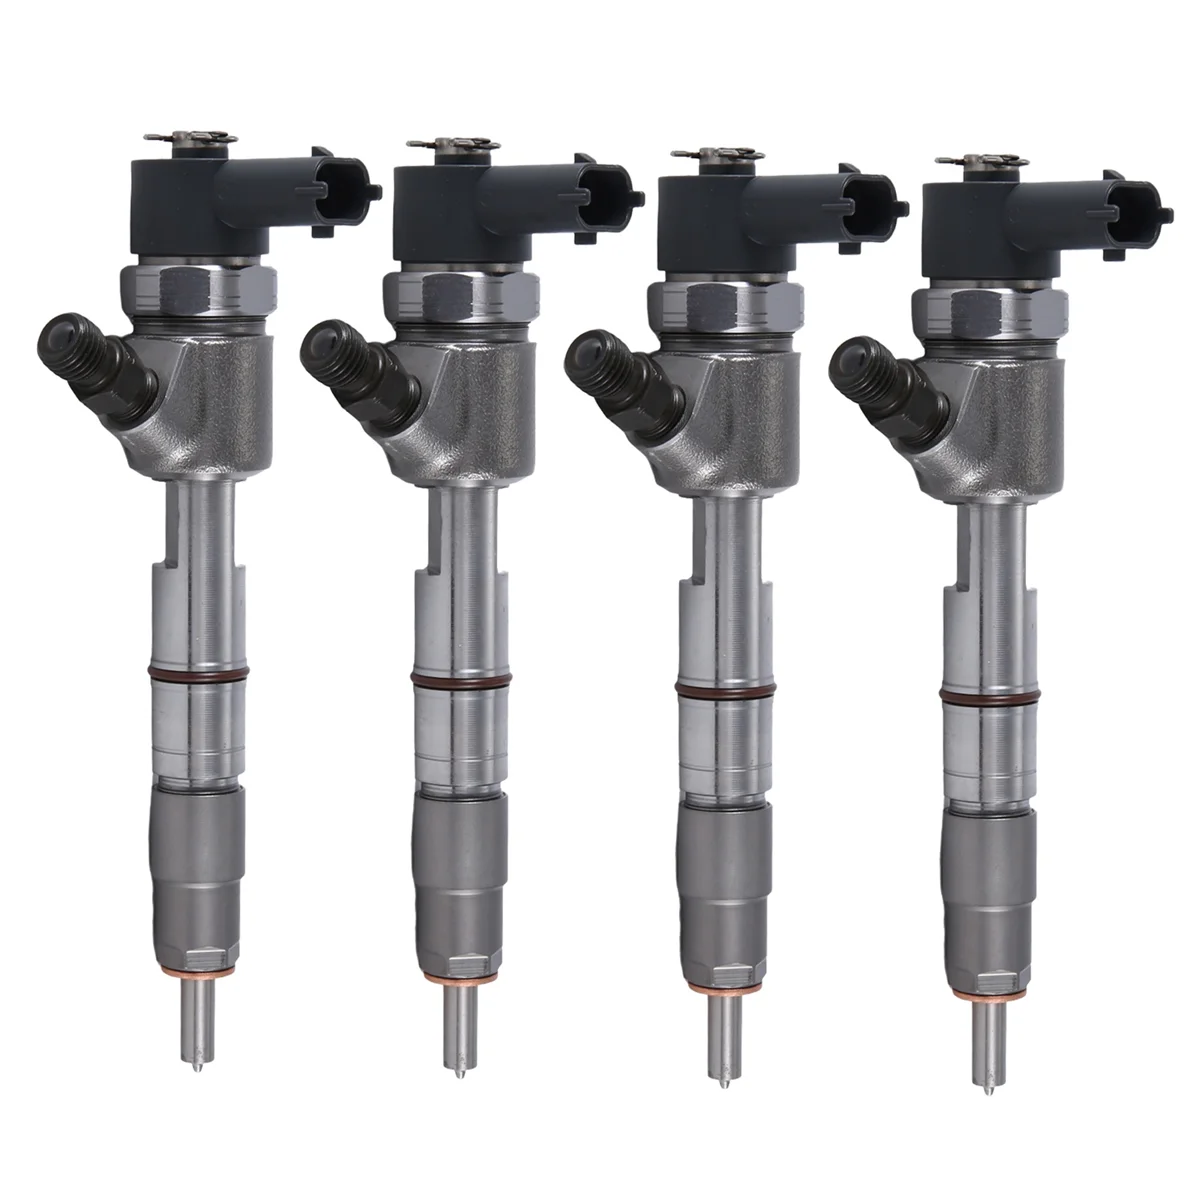 

4PCS 0445110719 New Common Rail Diesel Fuel Injector Nozzle for Great Wall Wingle 5 Wingle 6 2.0L